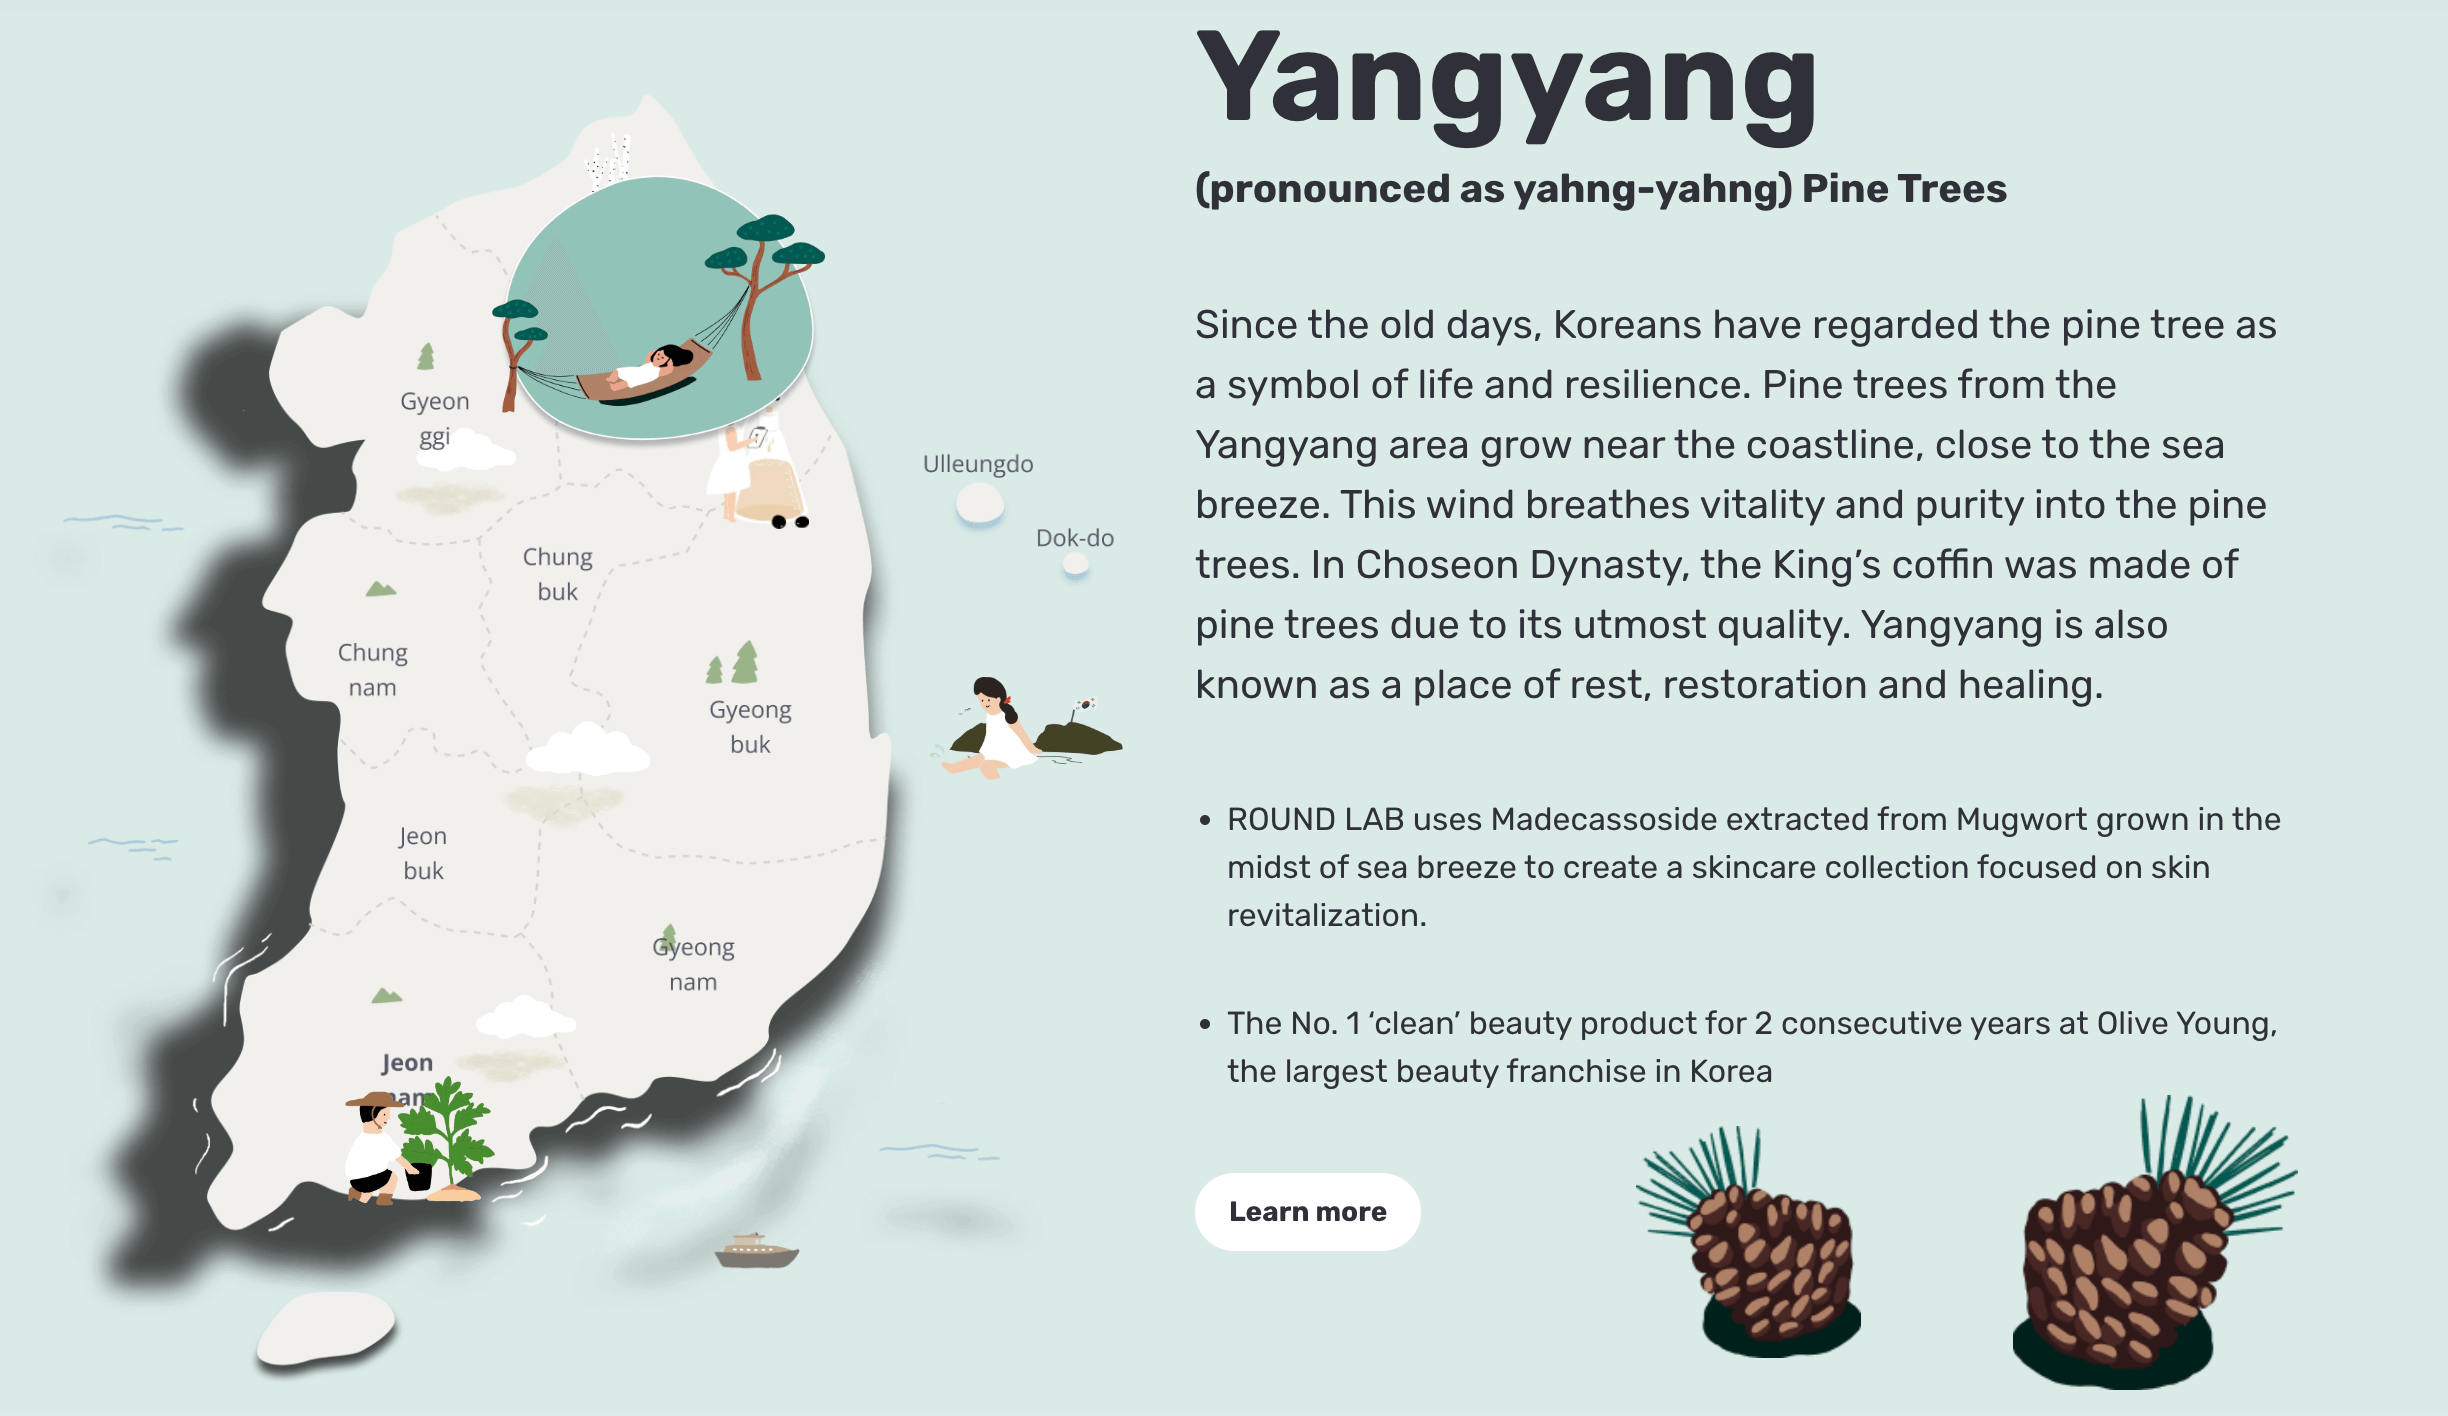 Storytelling Brands–A screenshot taken from Round Lab’s website of the description of its Pine Tree line: Yangyang (pronounced as yahng-yahng) Pine Trees Since the old days, Koreans have regarded the pine tree as a symbol of life and resilience. Pine trees from the Yangyang area grow near the coastline, close to the sea breeze. This wind breathes vitality and purity into the pine trees. In Choseon Dynasty, the King’s coffin was made of pine trees due to its utmost quality. Yangyang is also known as a place of rest, restoration and healing. ROUND LAB uses Madecassoside extracted from Mugwort grown in the midst of sea breeze to create a skincare collection focused on skin revitalization. The No. 1 ‘clean’ beauty product for 2 consecutive years at Olive Young, the largest beauty franchise in Korea. Surrounding the bio are cartoon pinecones and a map of the South Korean peninsula. 